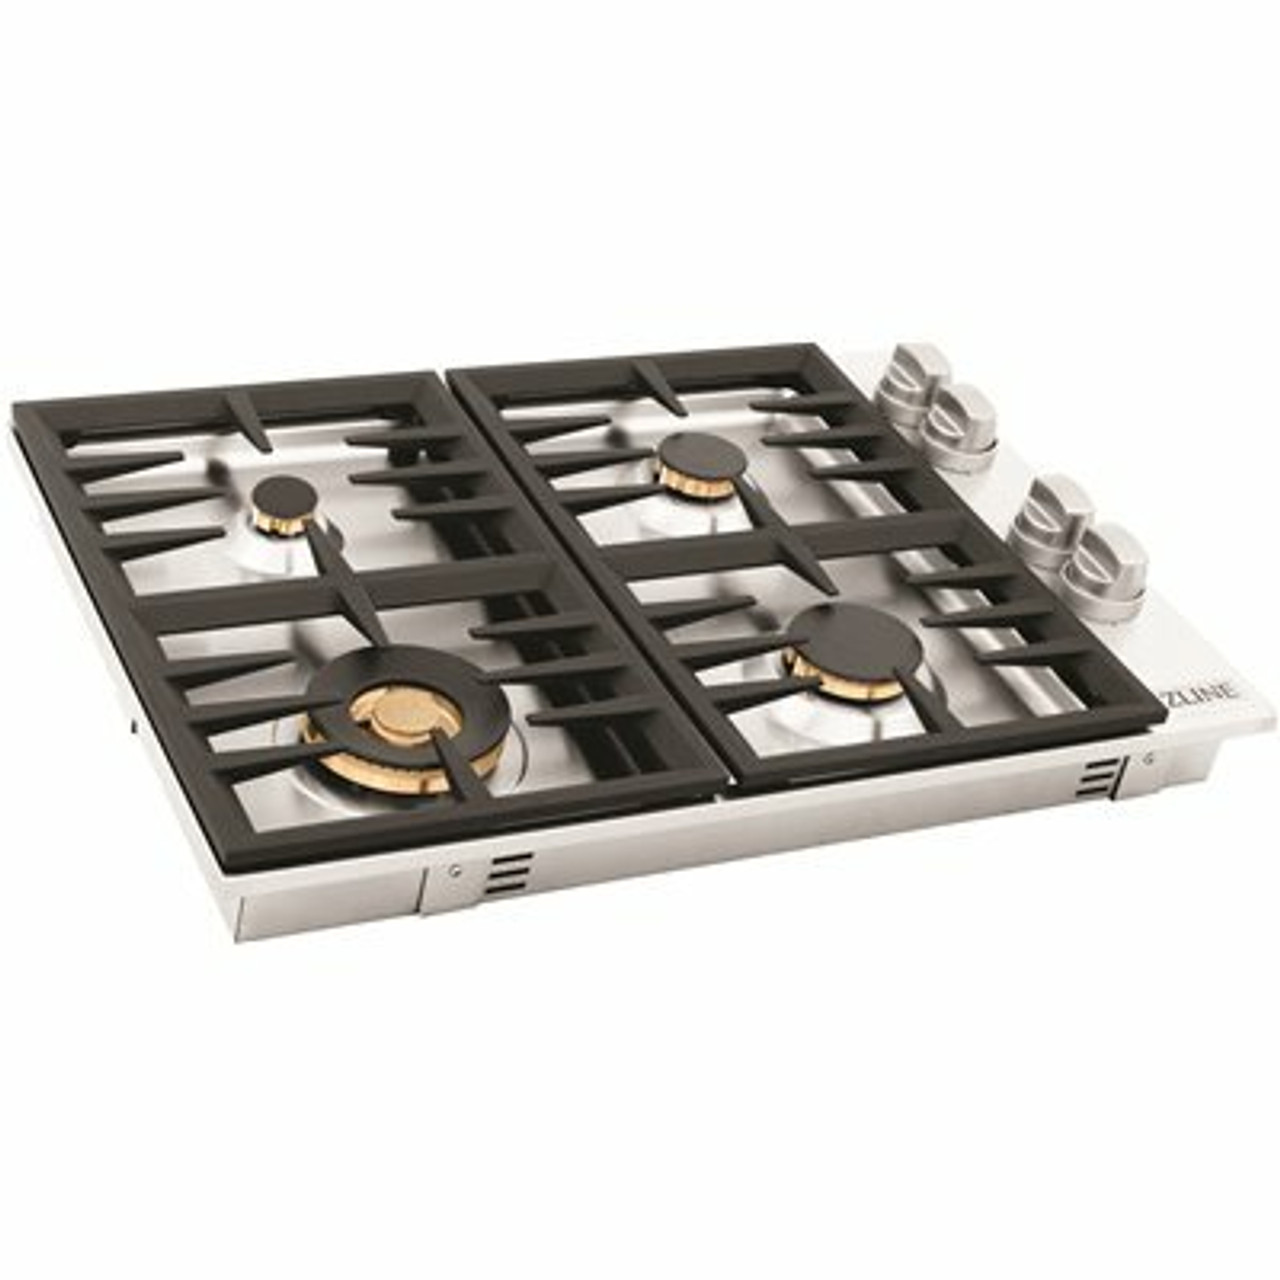 Zline Kitchen And Bath Zline 30 In. Dropin Gas Stovetop With 4 Gas Brass Burners (Rc-Br-30)